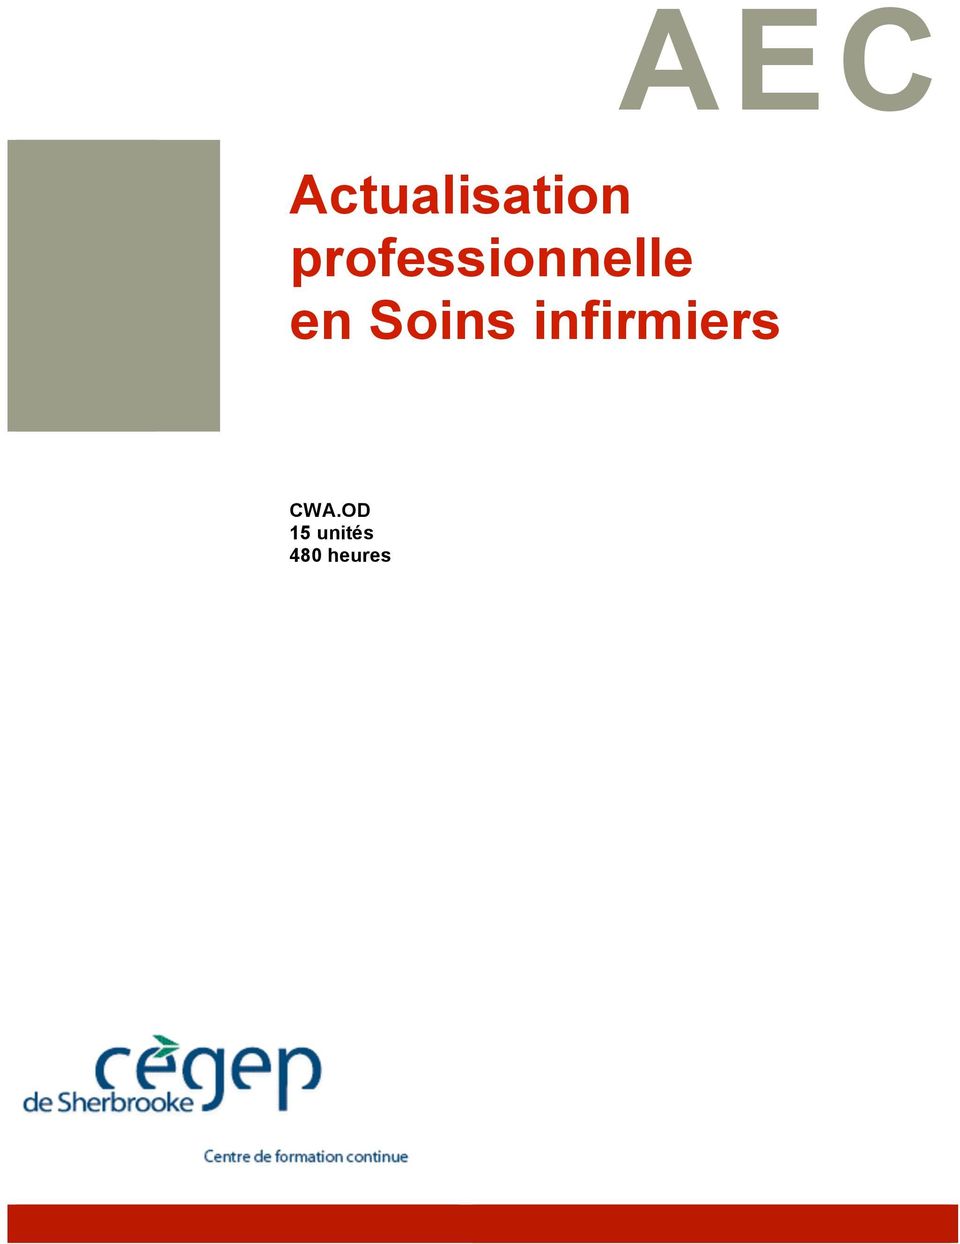 Soins infirmiers CWA.